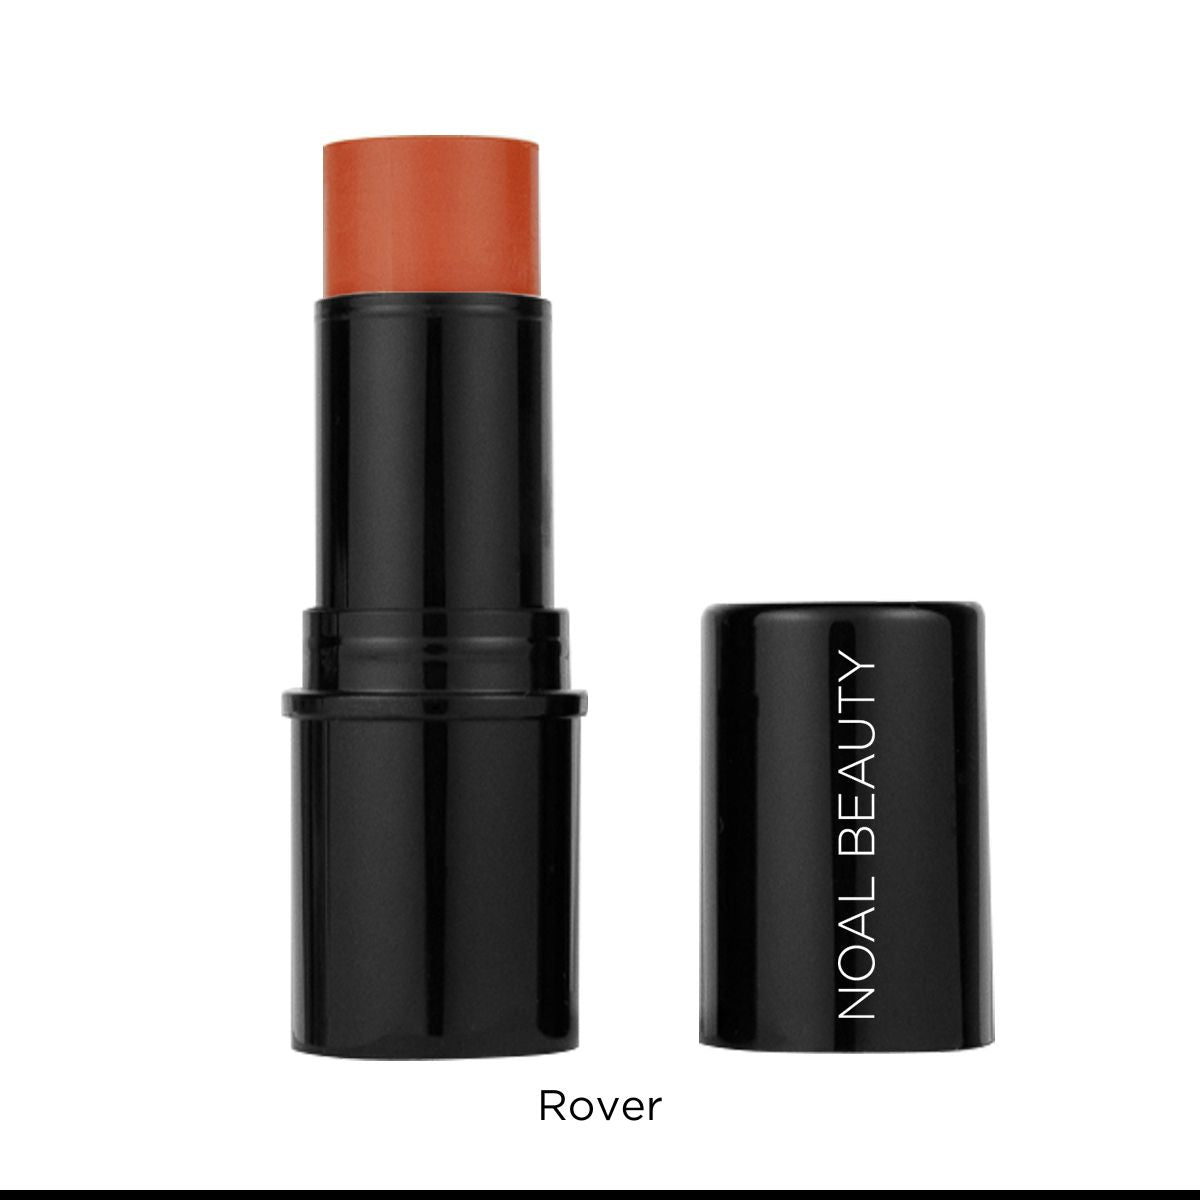 noal-beauty-rover-3-in-1-color-stick-lips-eyes-cheeks